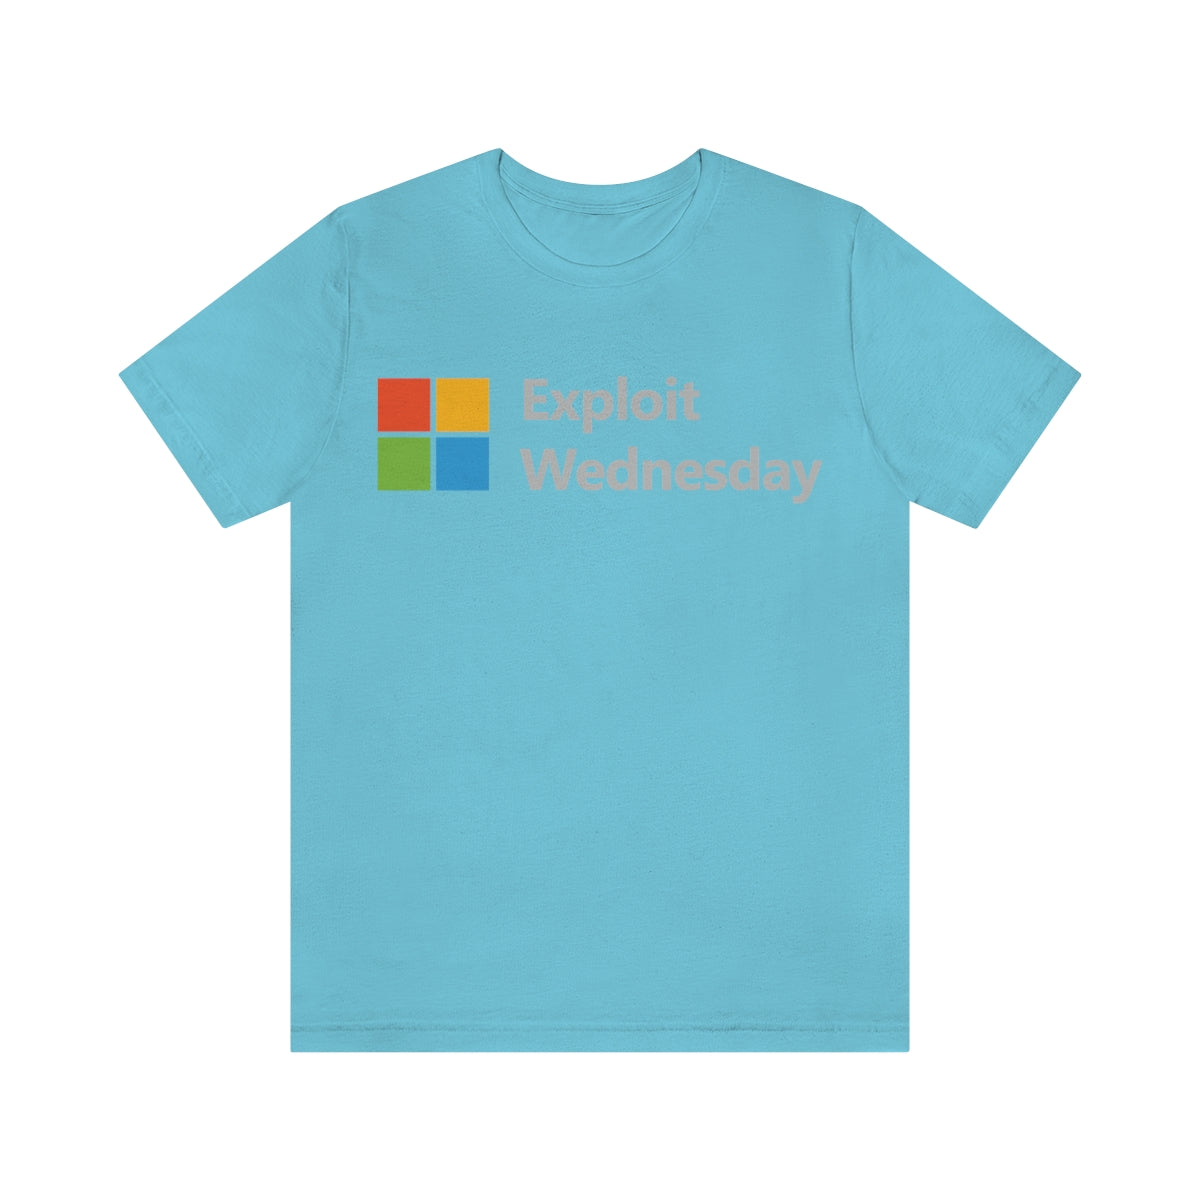 Exploit Wednesday (Even More Colors! Unisex Jersey Short Sleeve Tee)